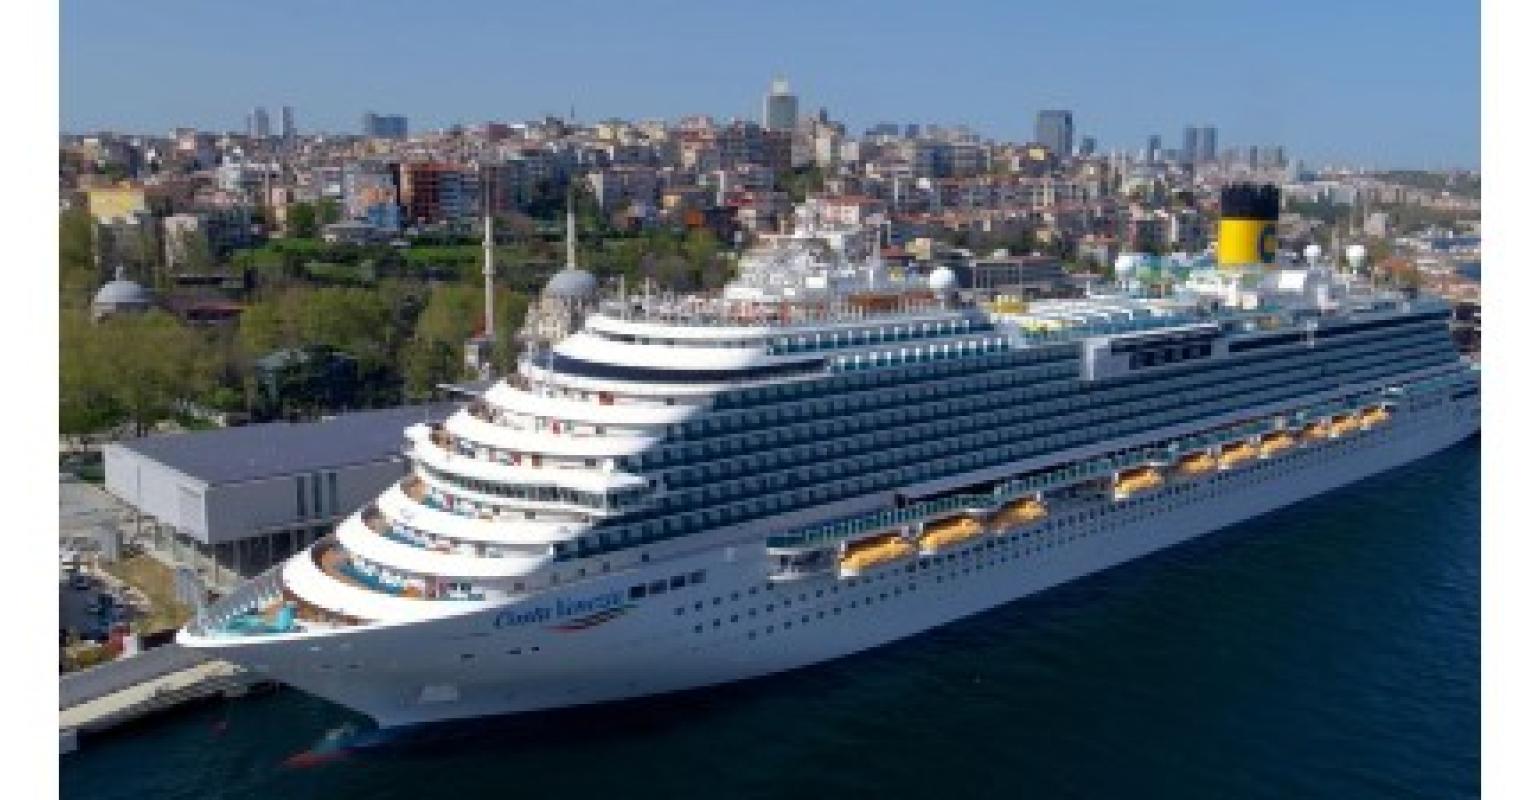 Costa flycruises from Istanbul to Greece/Turkey ready for takeoff